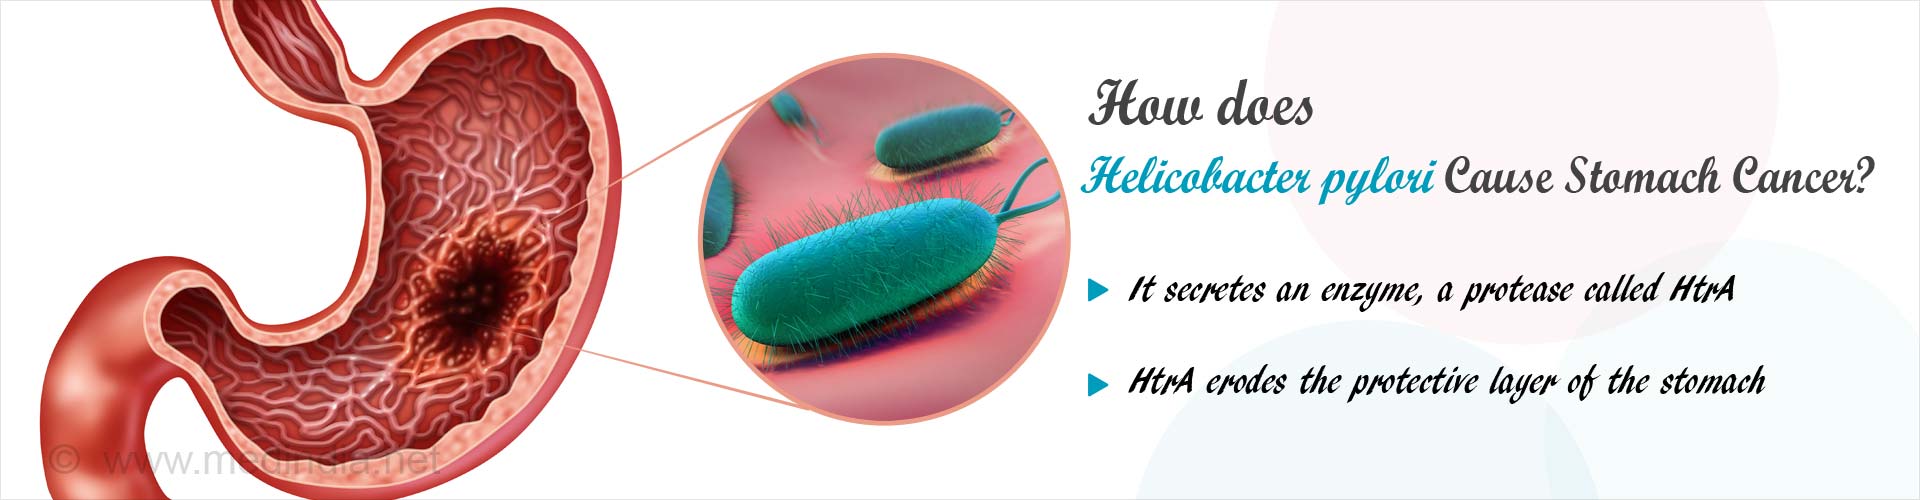 How does helicobacter pylori cause stomach cancer?
- it secretes an enzyme, a protease called HtrA
- HtrA erodes the protective layer of the stomach